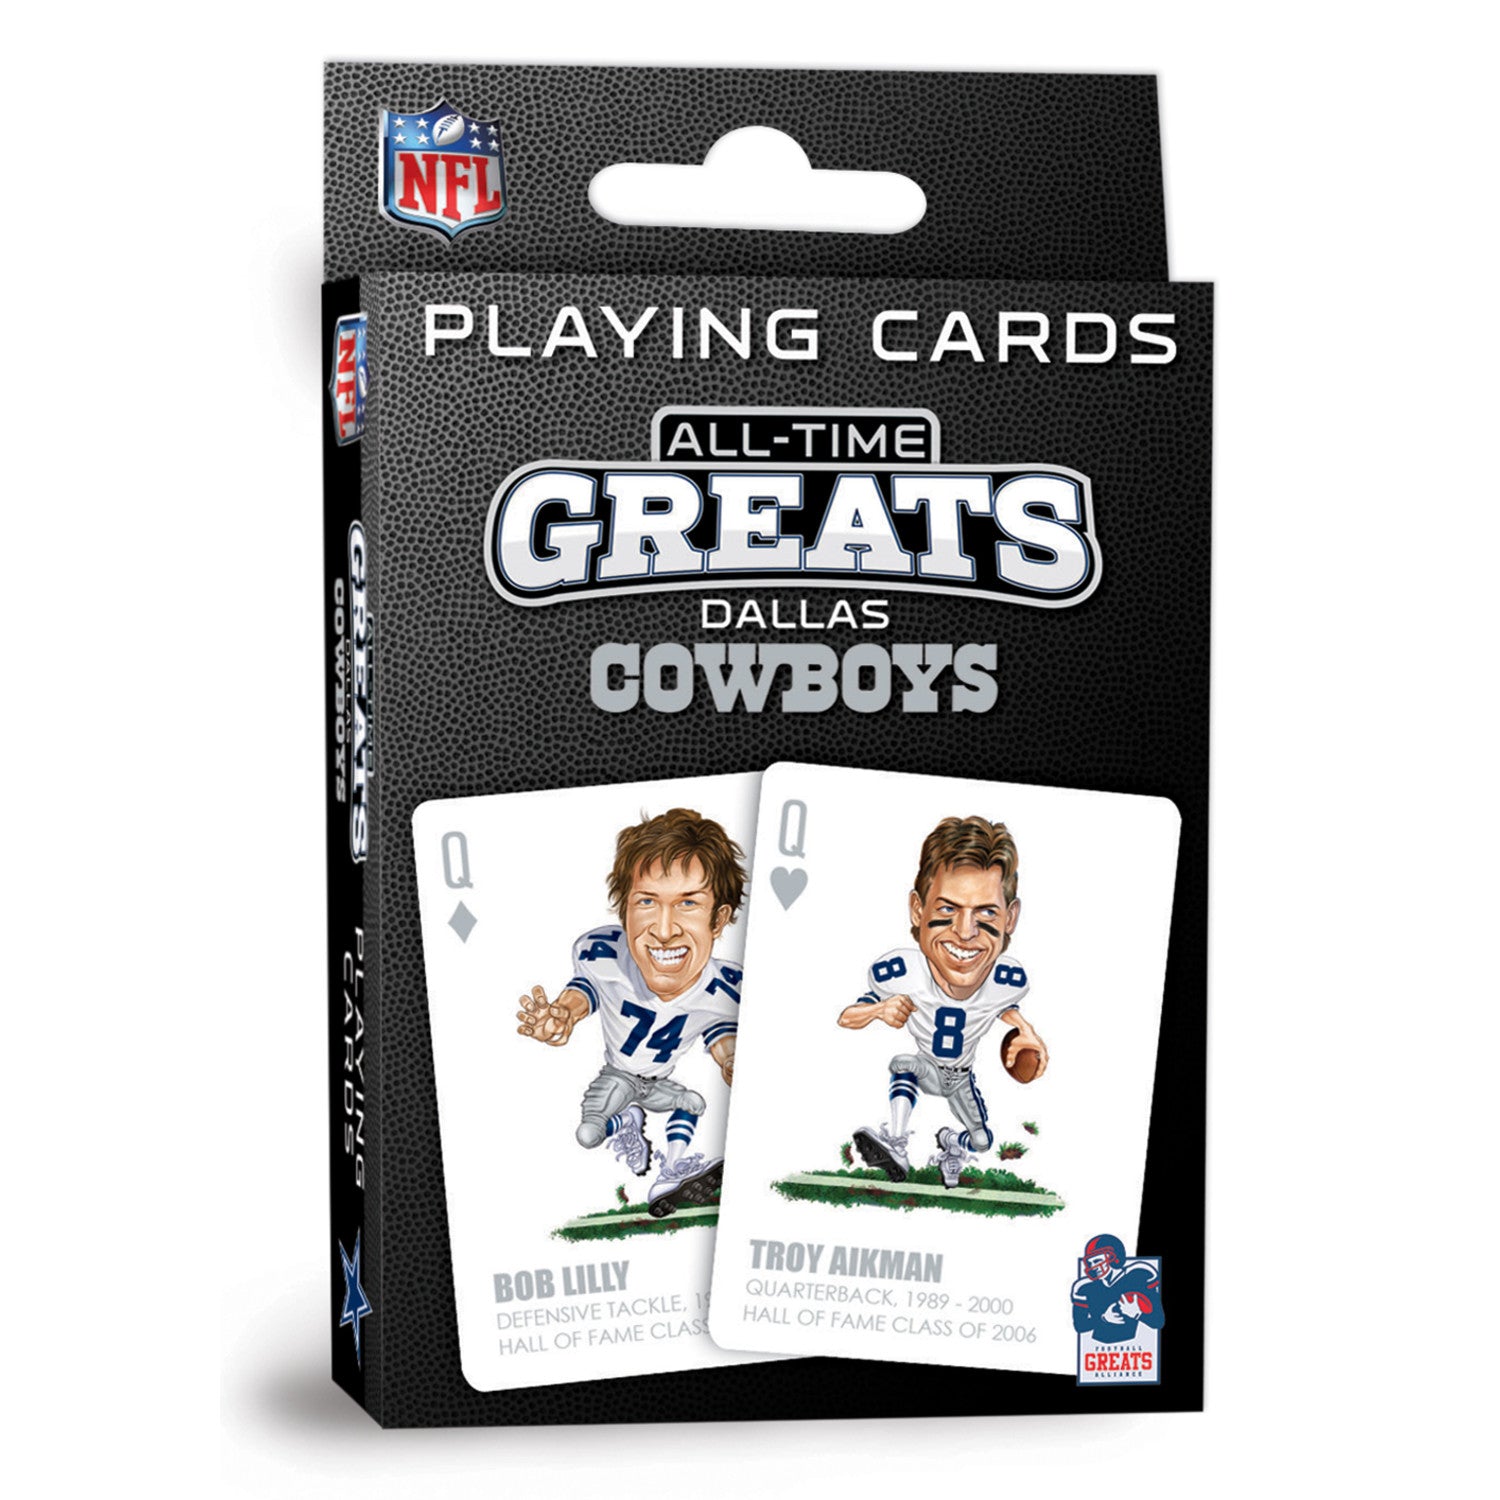 Dallas Cowboys All-Time Greats Playing Cards - 54 Card Deck